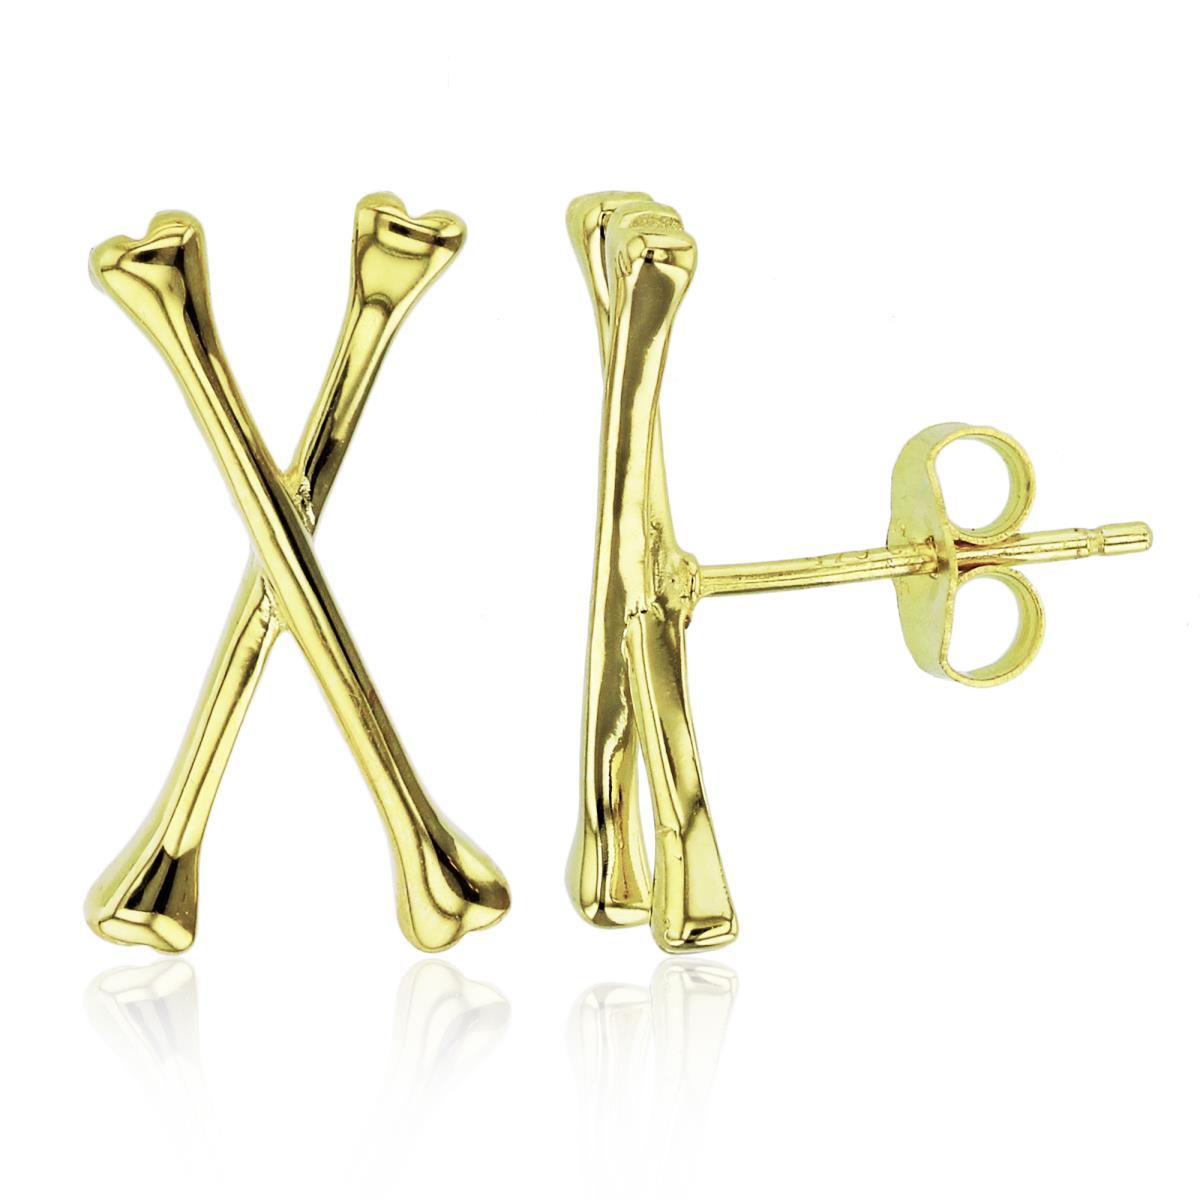 Sterling Silver+1Micron Yellow Gold High Polish "X" Stud Earrings